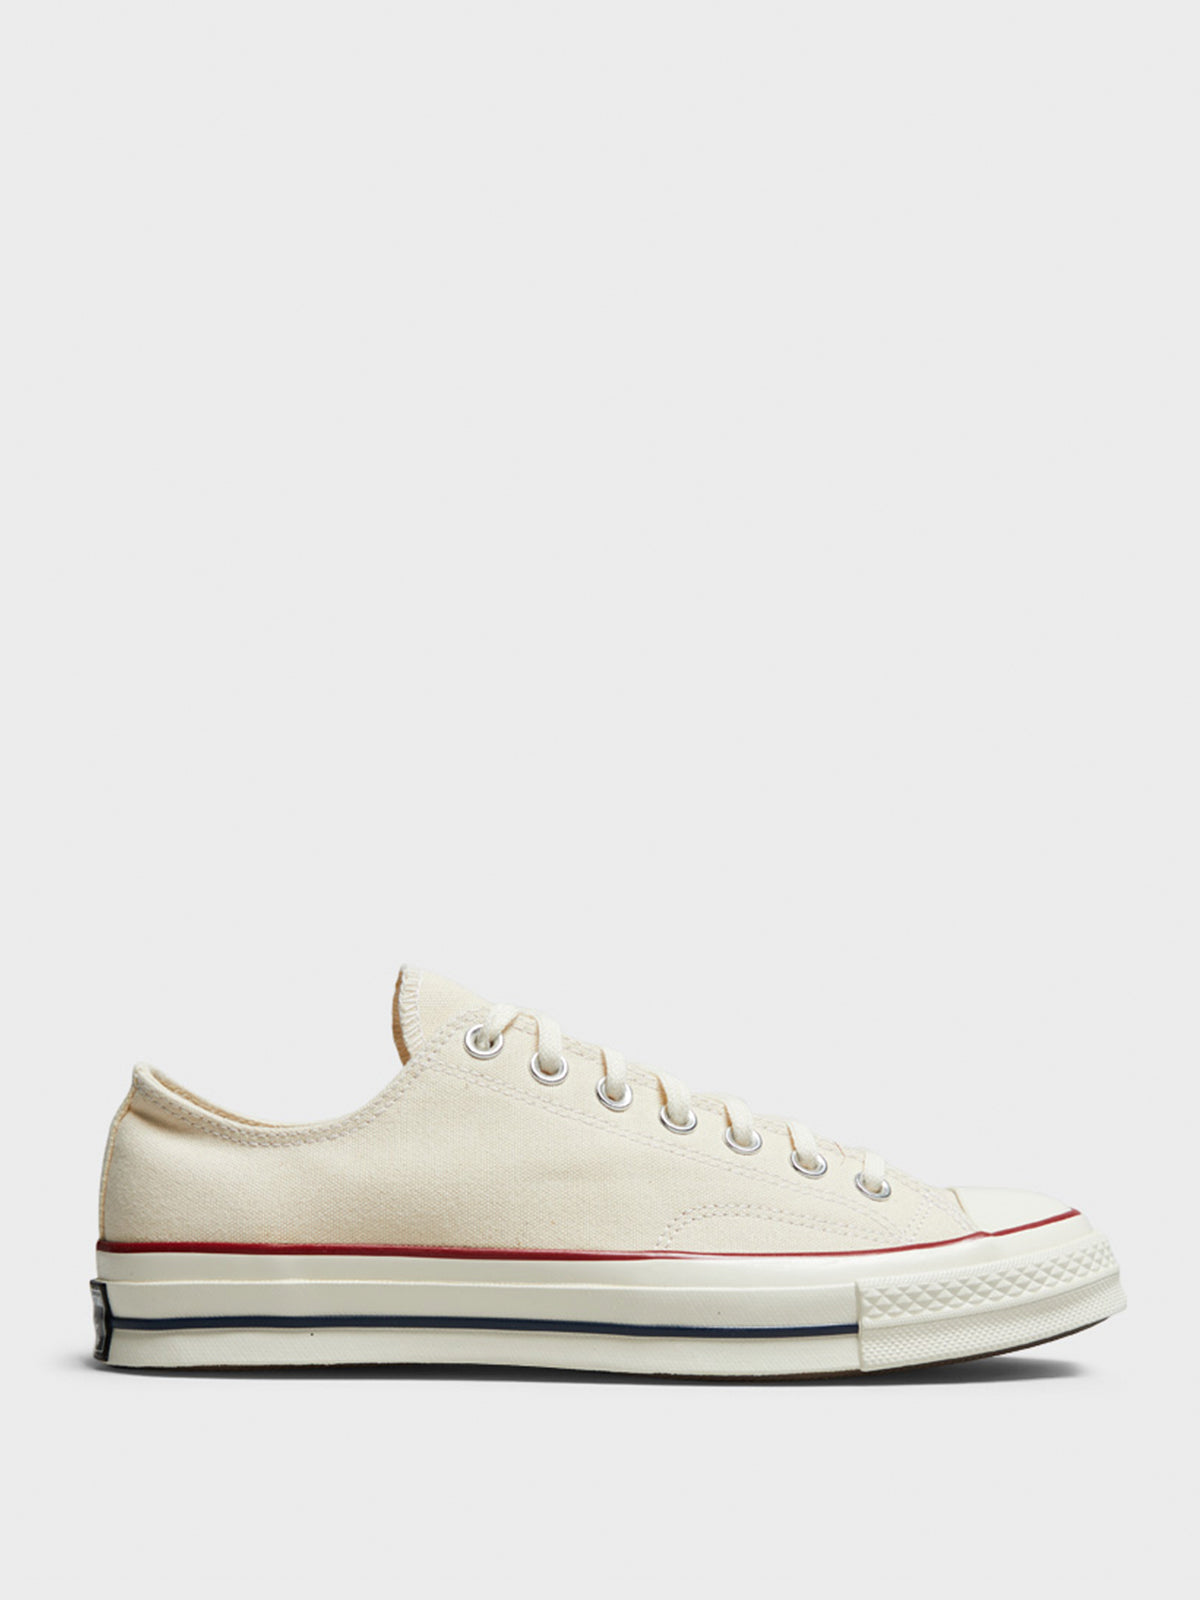 Chuck 70 Low Top Canvas Sneakers in Off-White